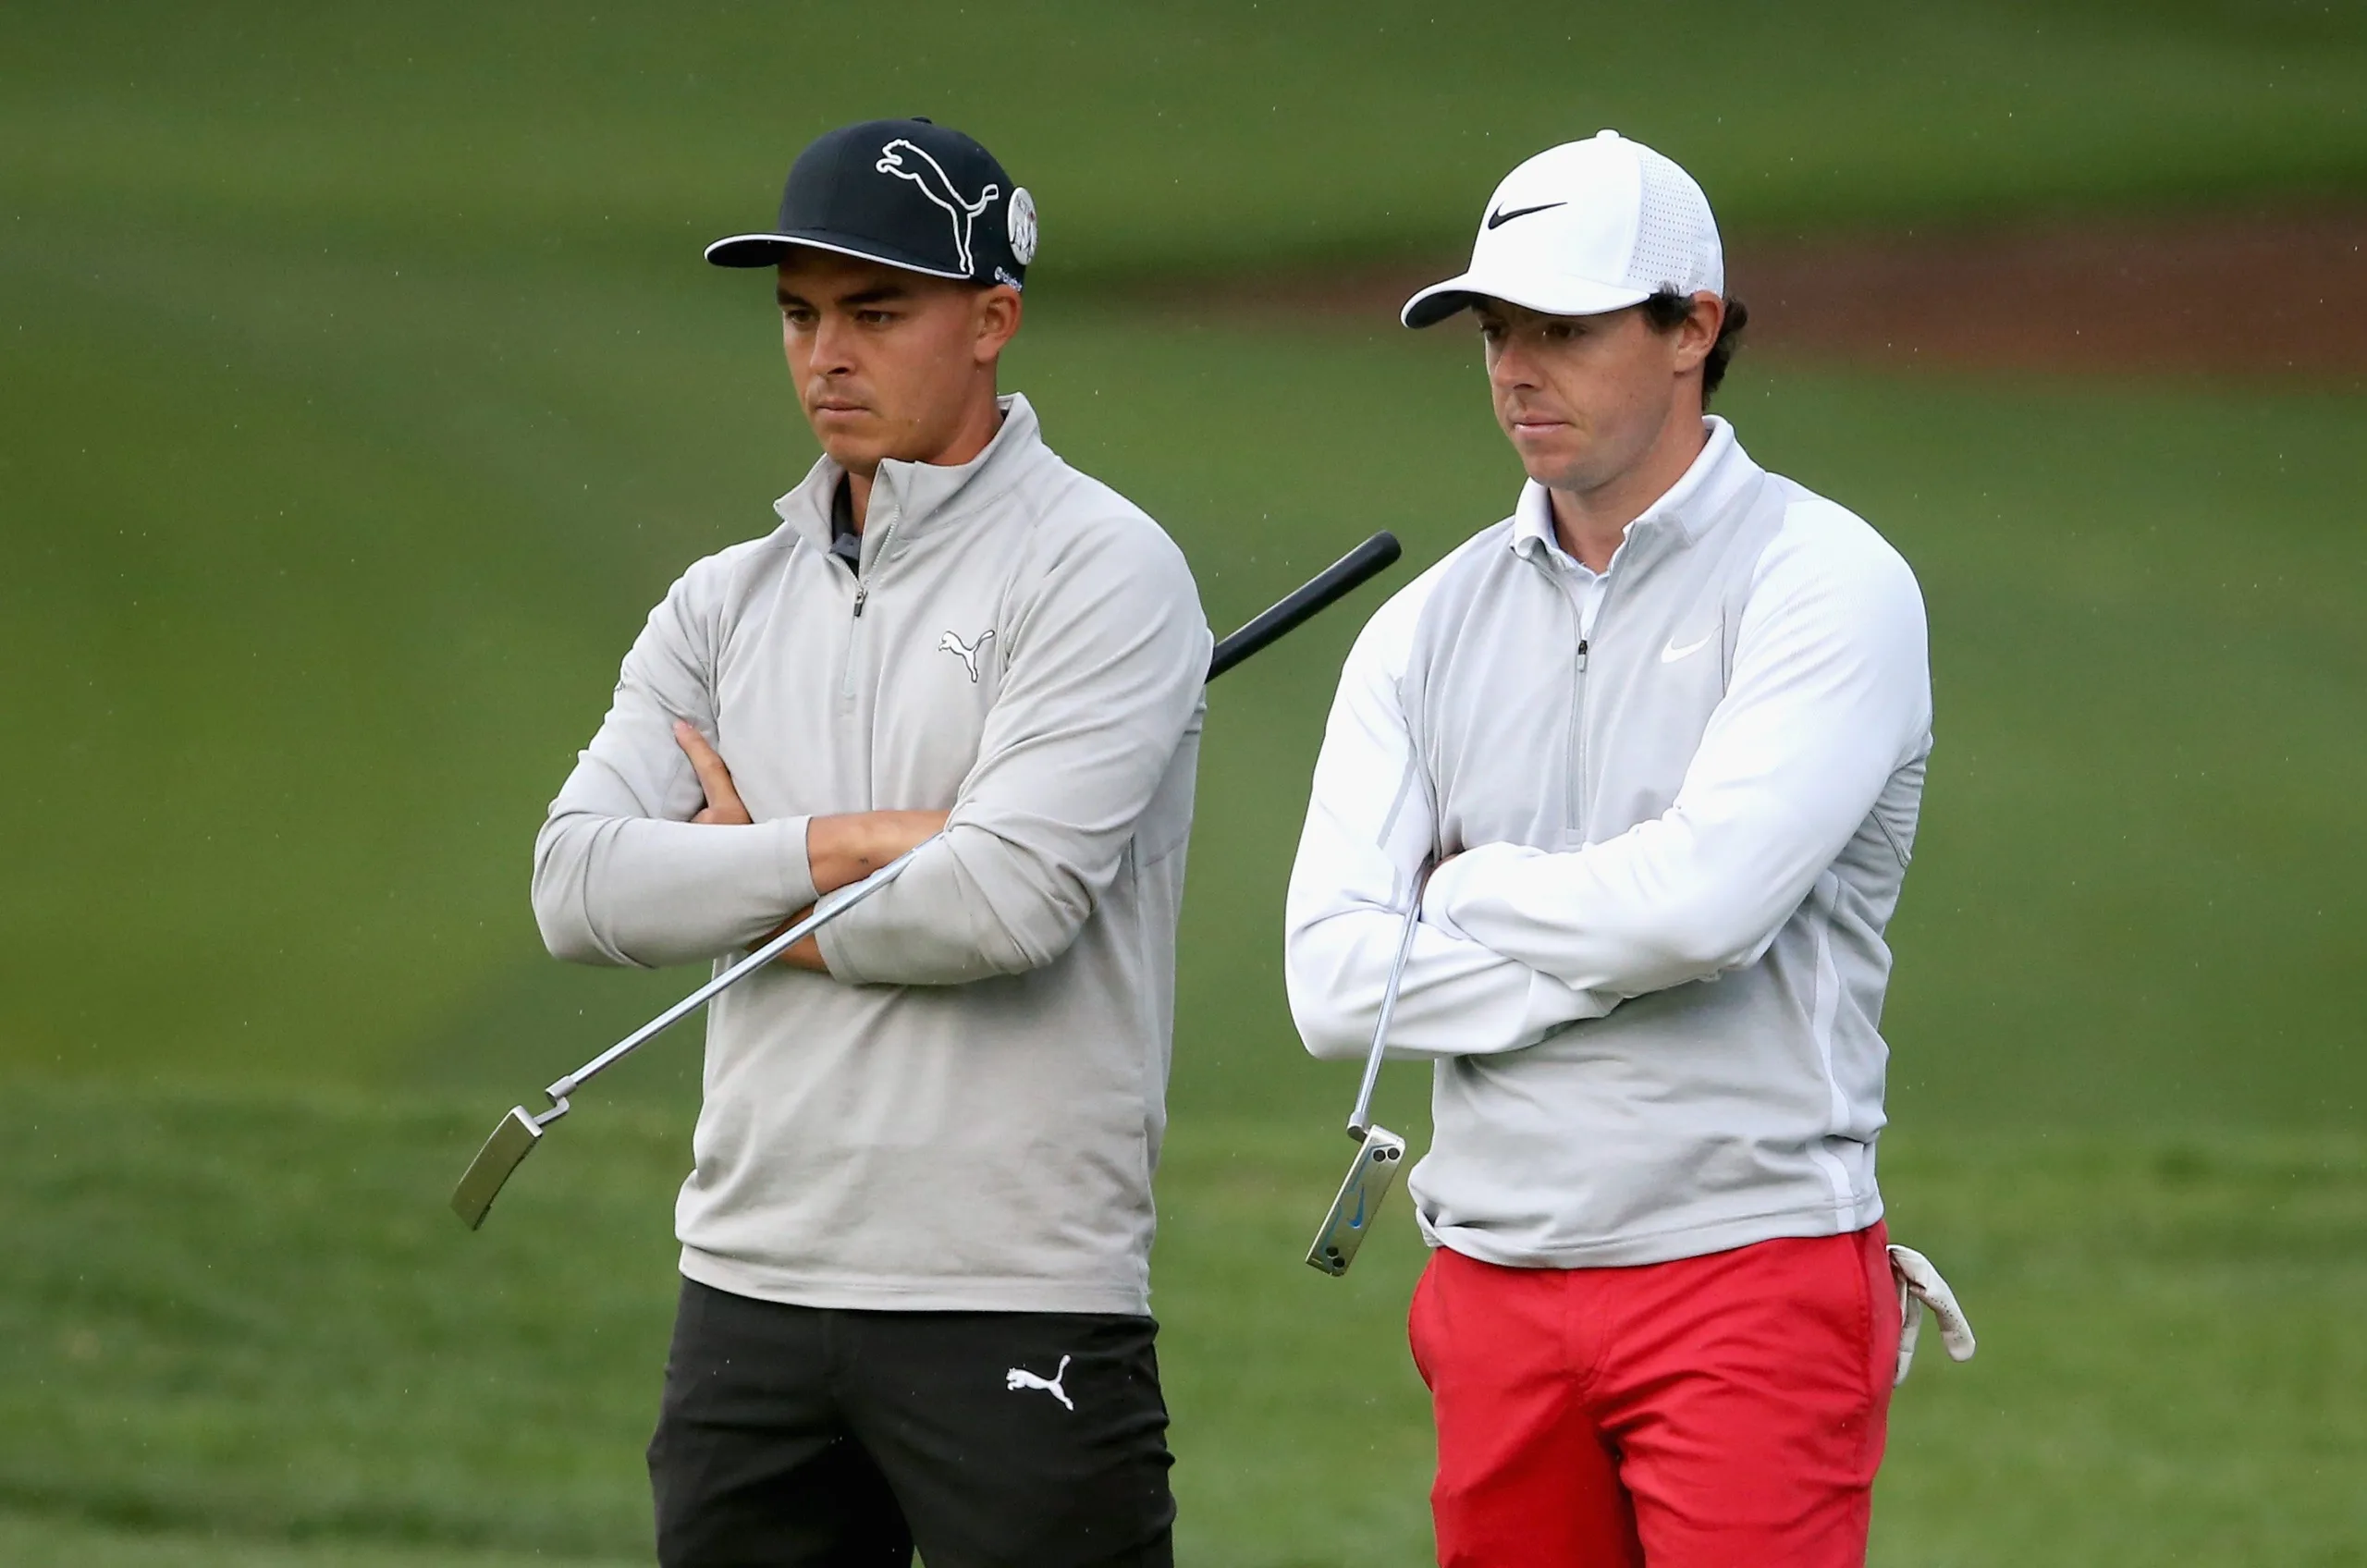 Rickie Fowler and Rory McIlroy caused a stir at The Players